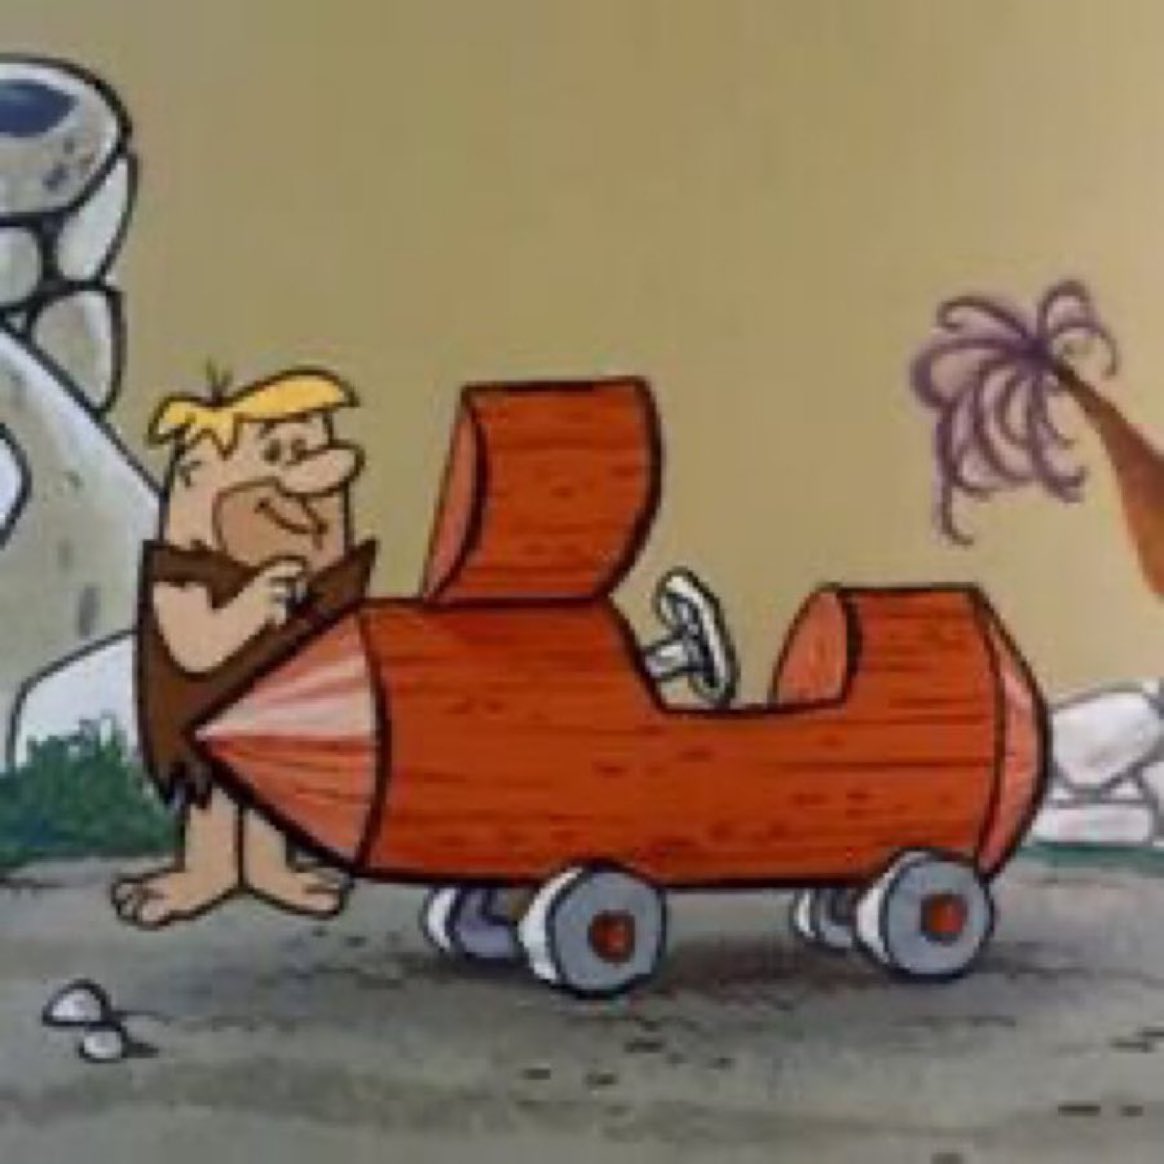 Barney Rubble’s car is underrated as hell. Motherfucker was just out there driving a first grade pencil around.